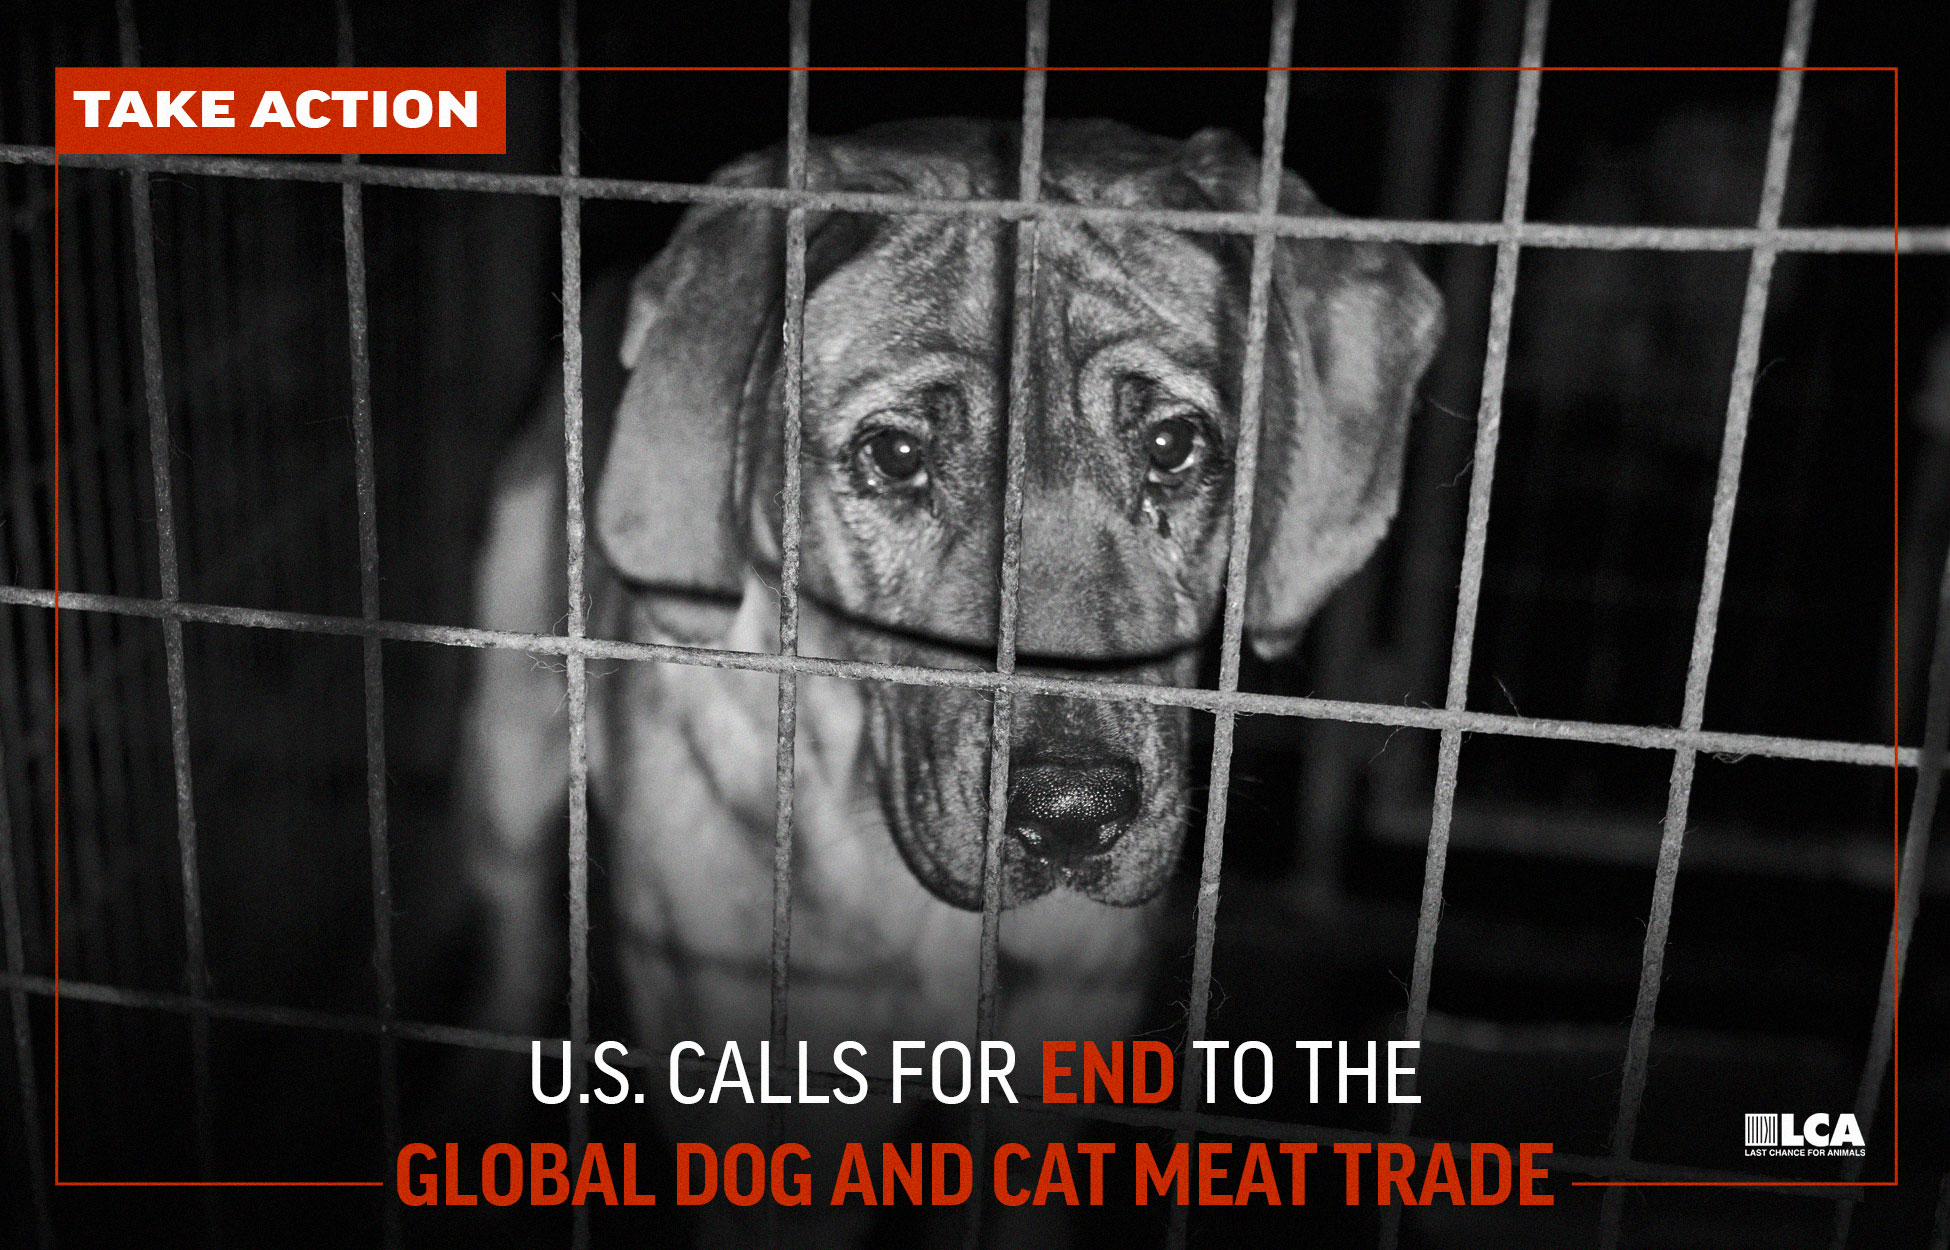 Take Action - US Calls for End to Global Dog and Cat Meat Trade